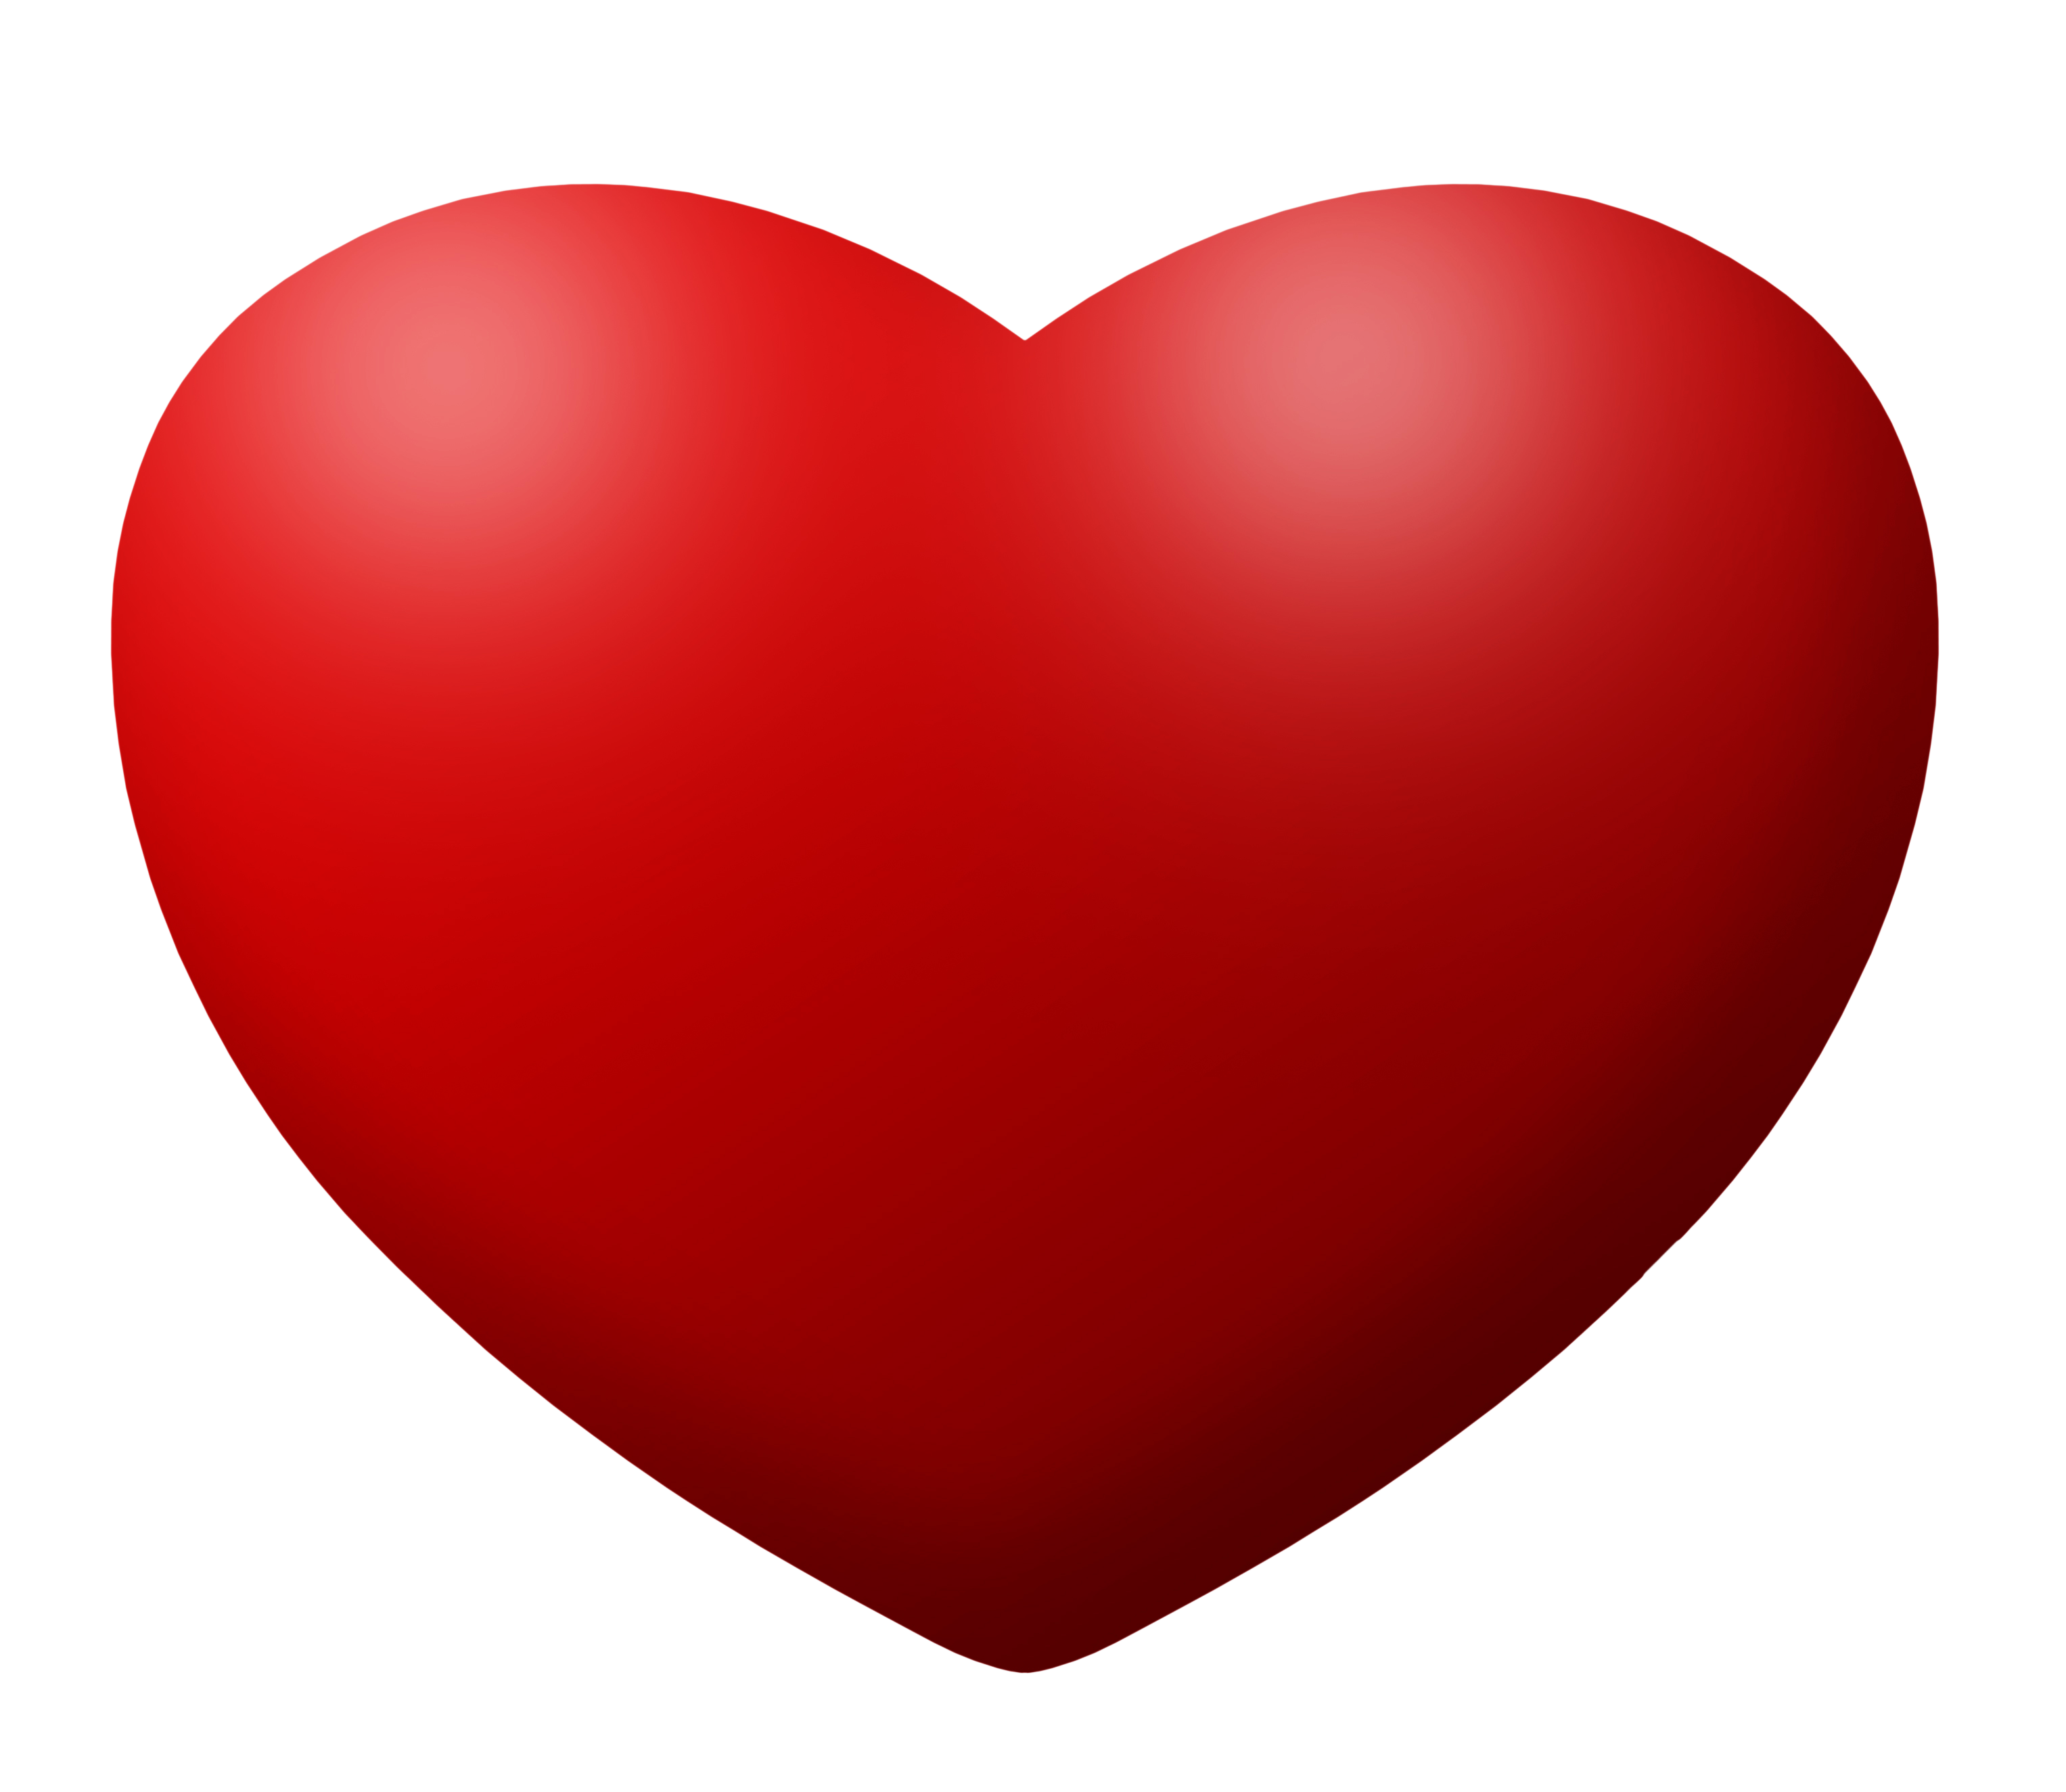 Red Heart Vector PNG Transparent Image